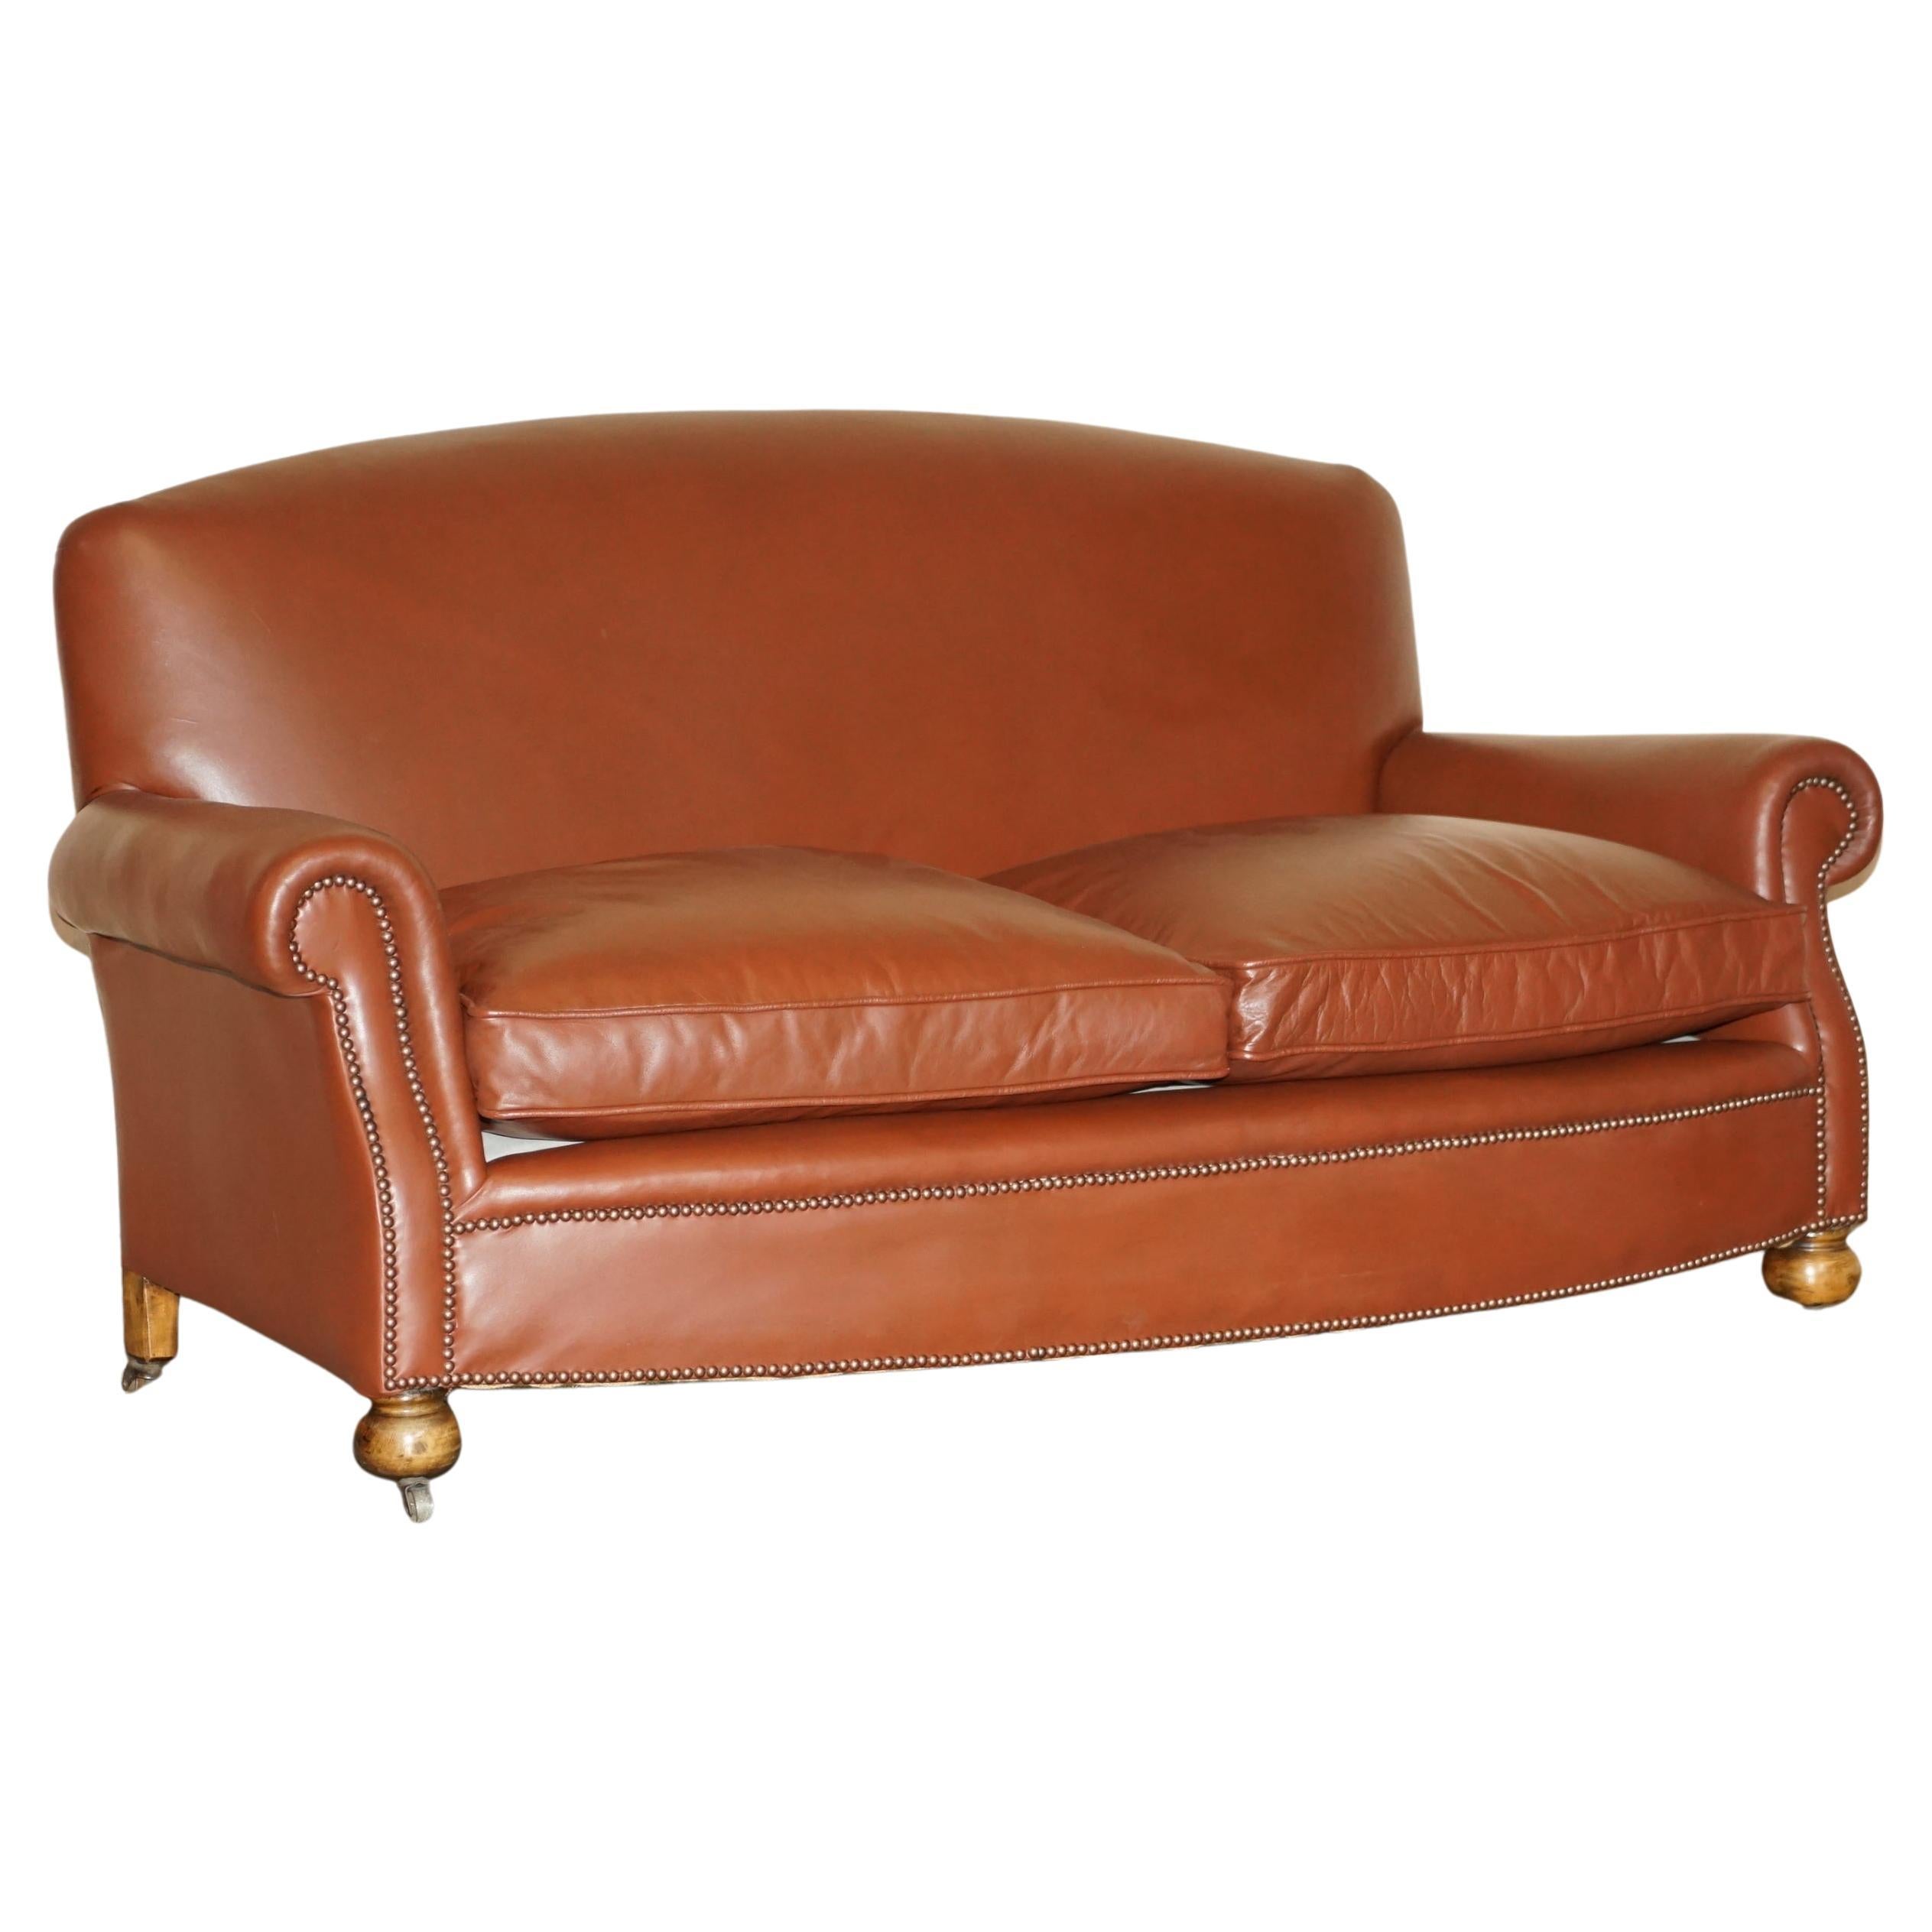 Antique 1910 Edwardian Brown Leather Club Sofa with Feather Filled Seat Cushions For Sale